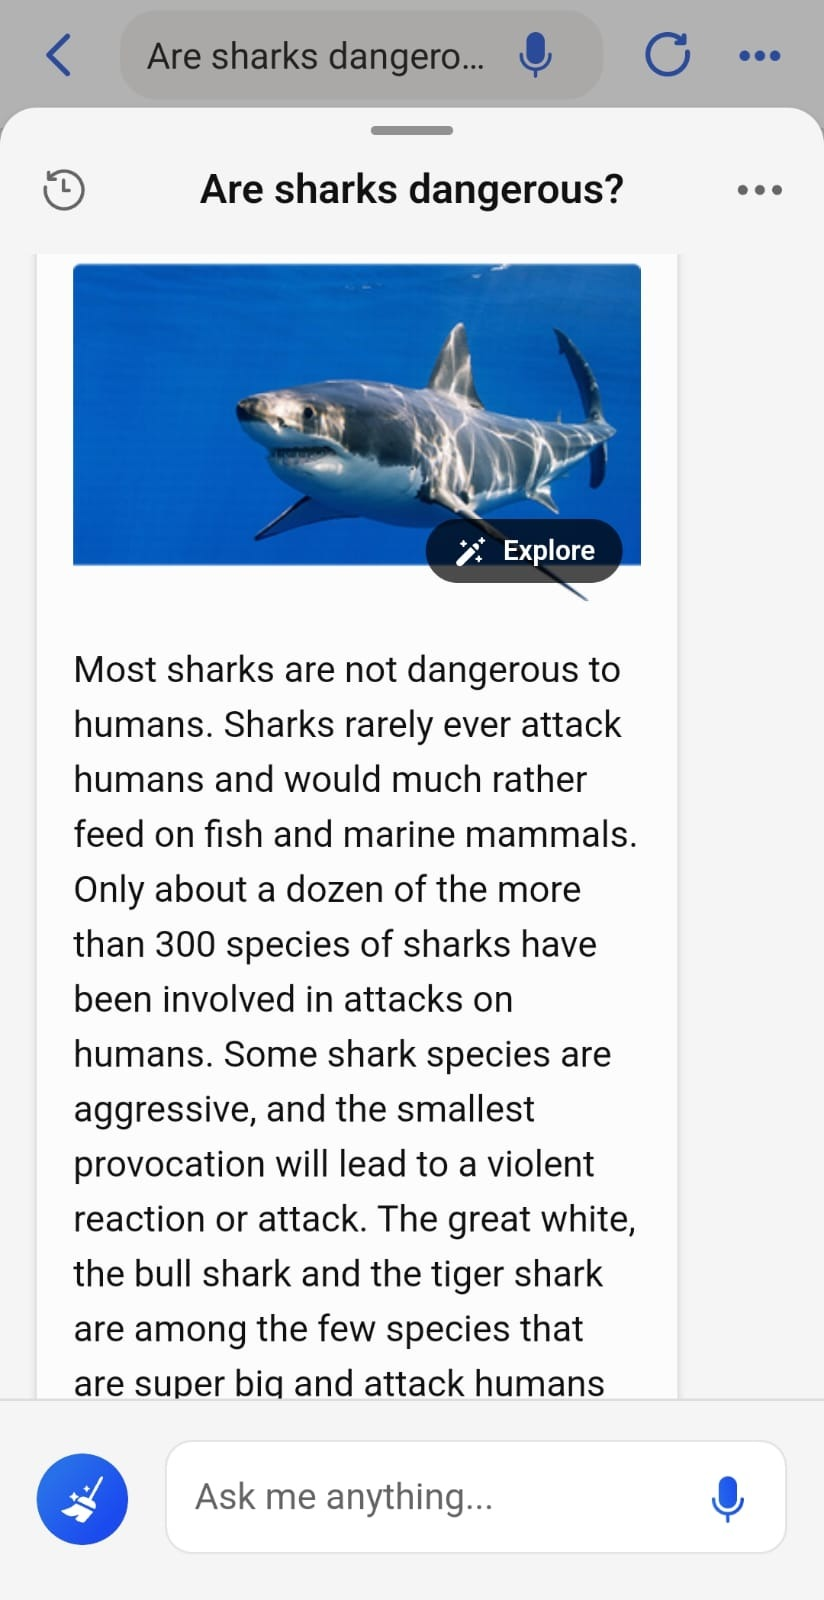 The chat function starting a conversation about the topic of 'are sharks dangerous?'